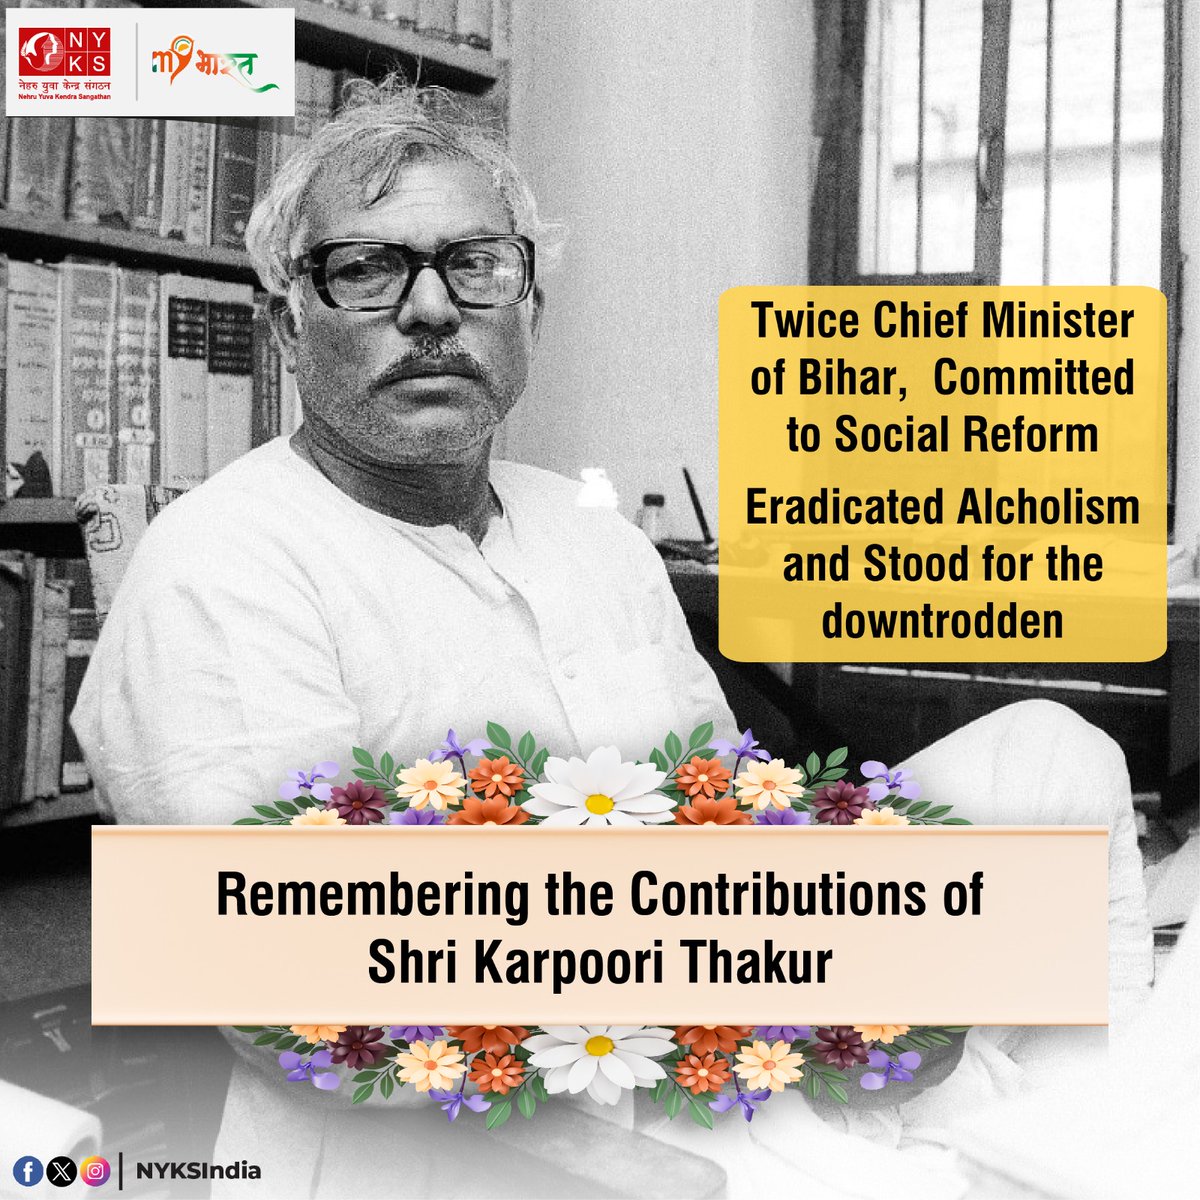 The Government of India will soon award Shri #KarpooriThakur ji with the highest civilian honor of the nation #BharatRatan who served twice as Chief Minister of Bihar and applied courageous policies for land reform, eradication of alcoholism and rights of the backward sections.